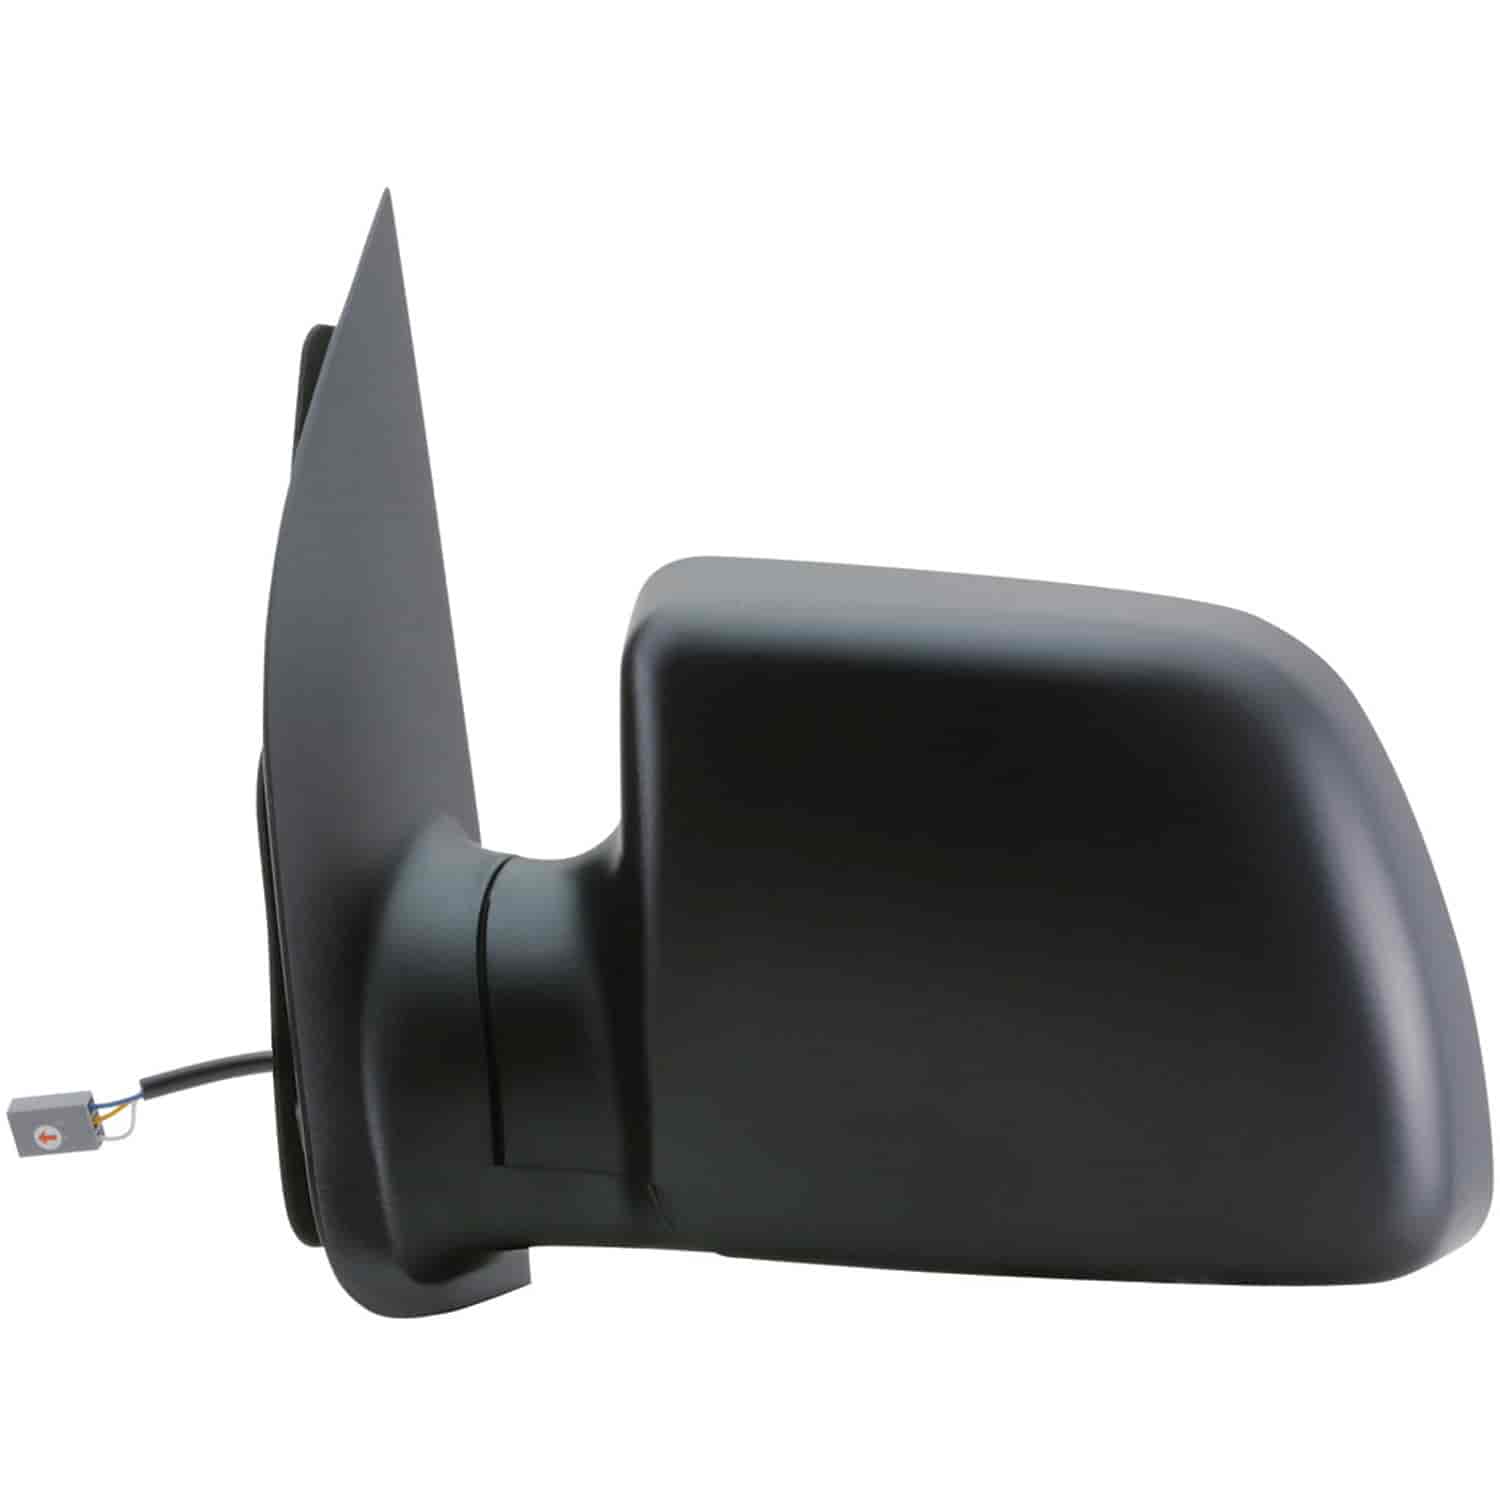 OEM Style Replacement mirror for 94-04 Ford Econoline Van driver side mirror tested to fit and funct